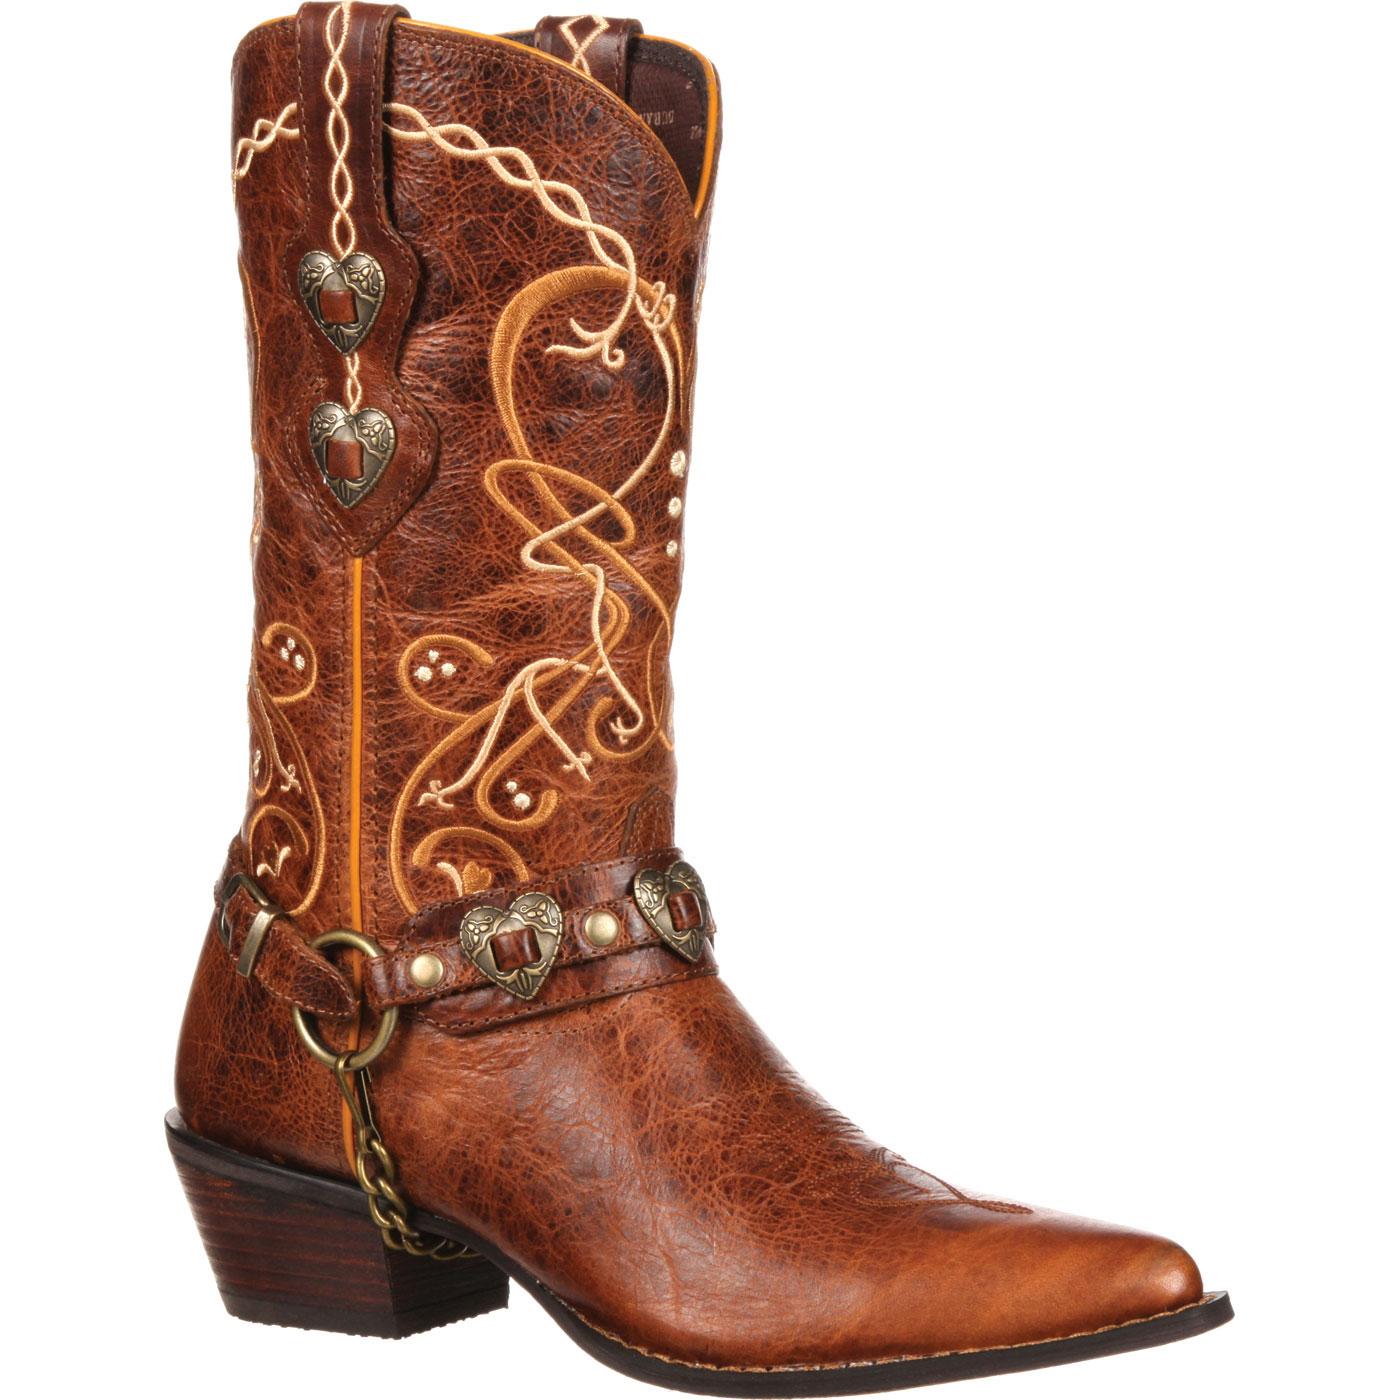 Durango® Boot: Women's 2 Pair Leather Accessory Boot Straps